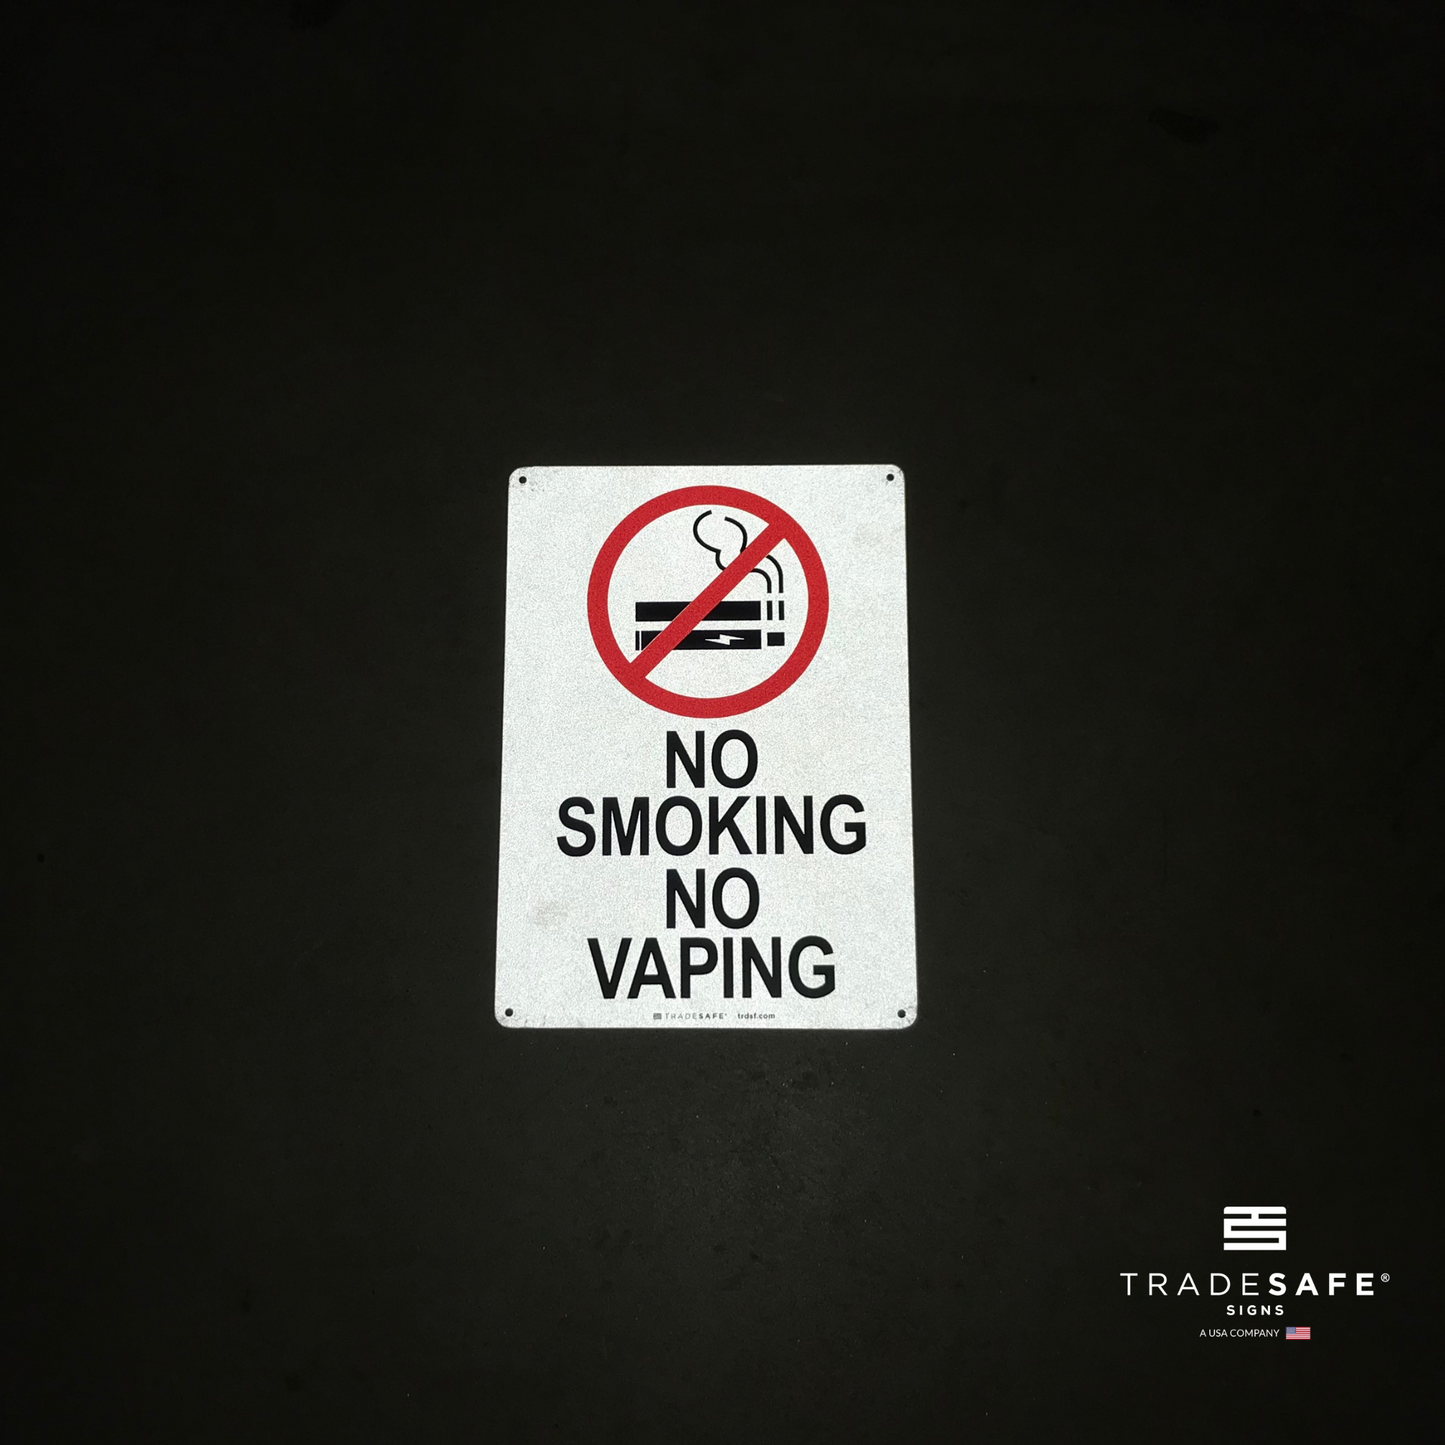 reflective attribute of no smoking no vaping sign on black background